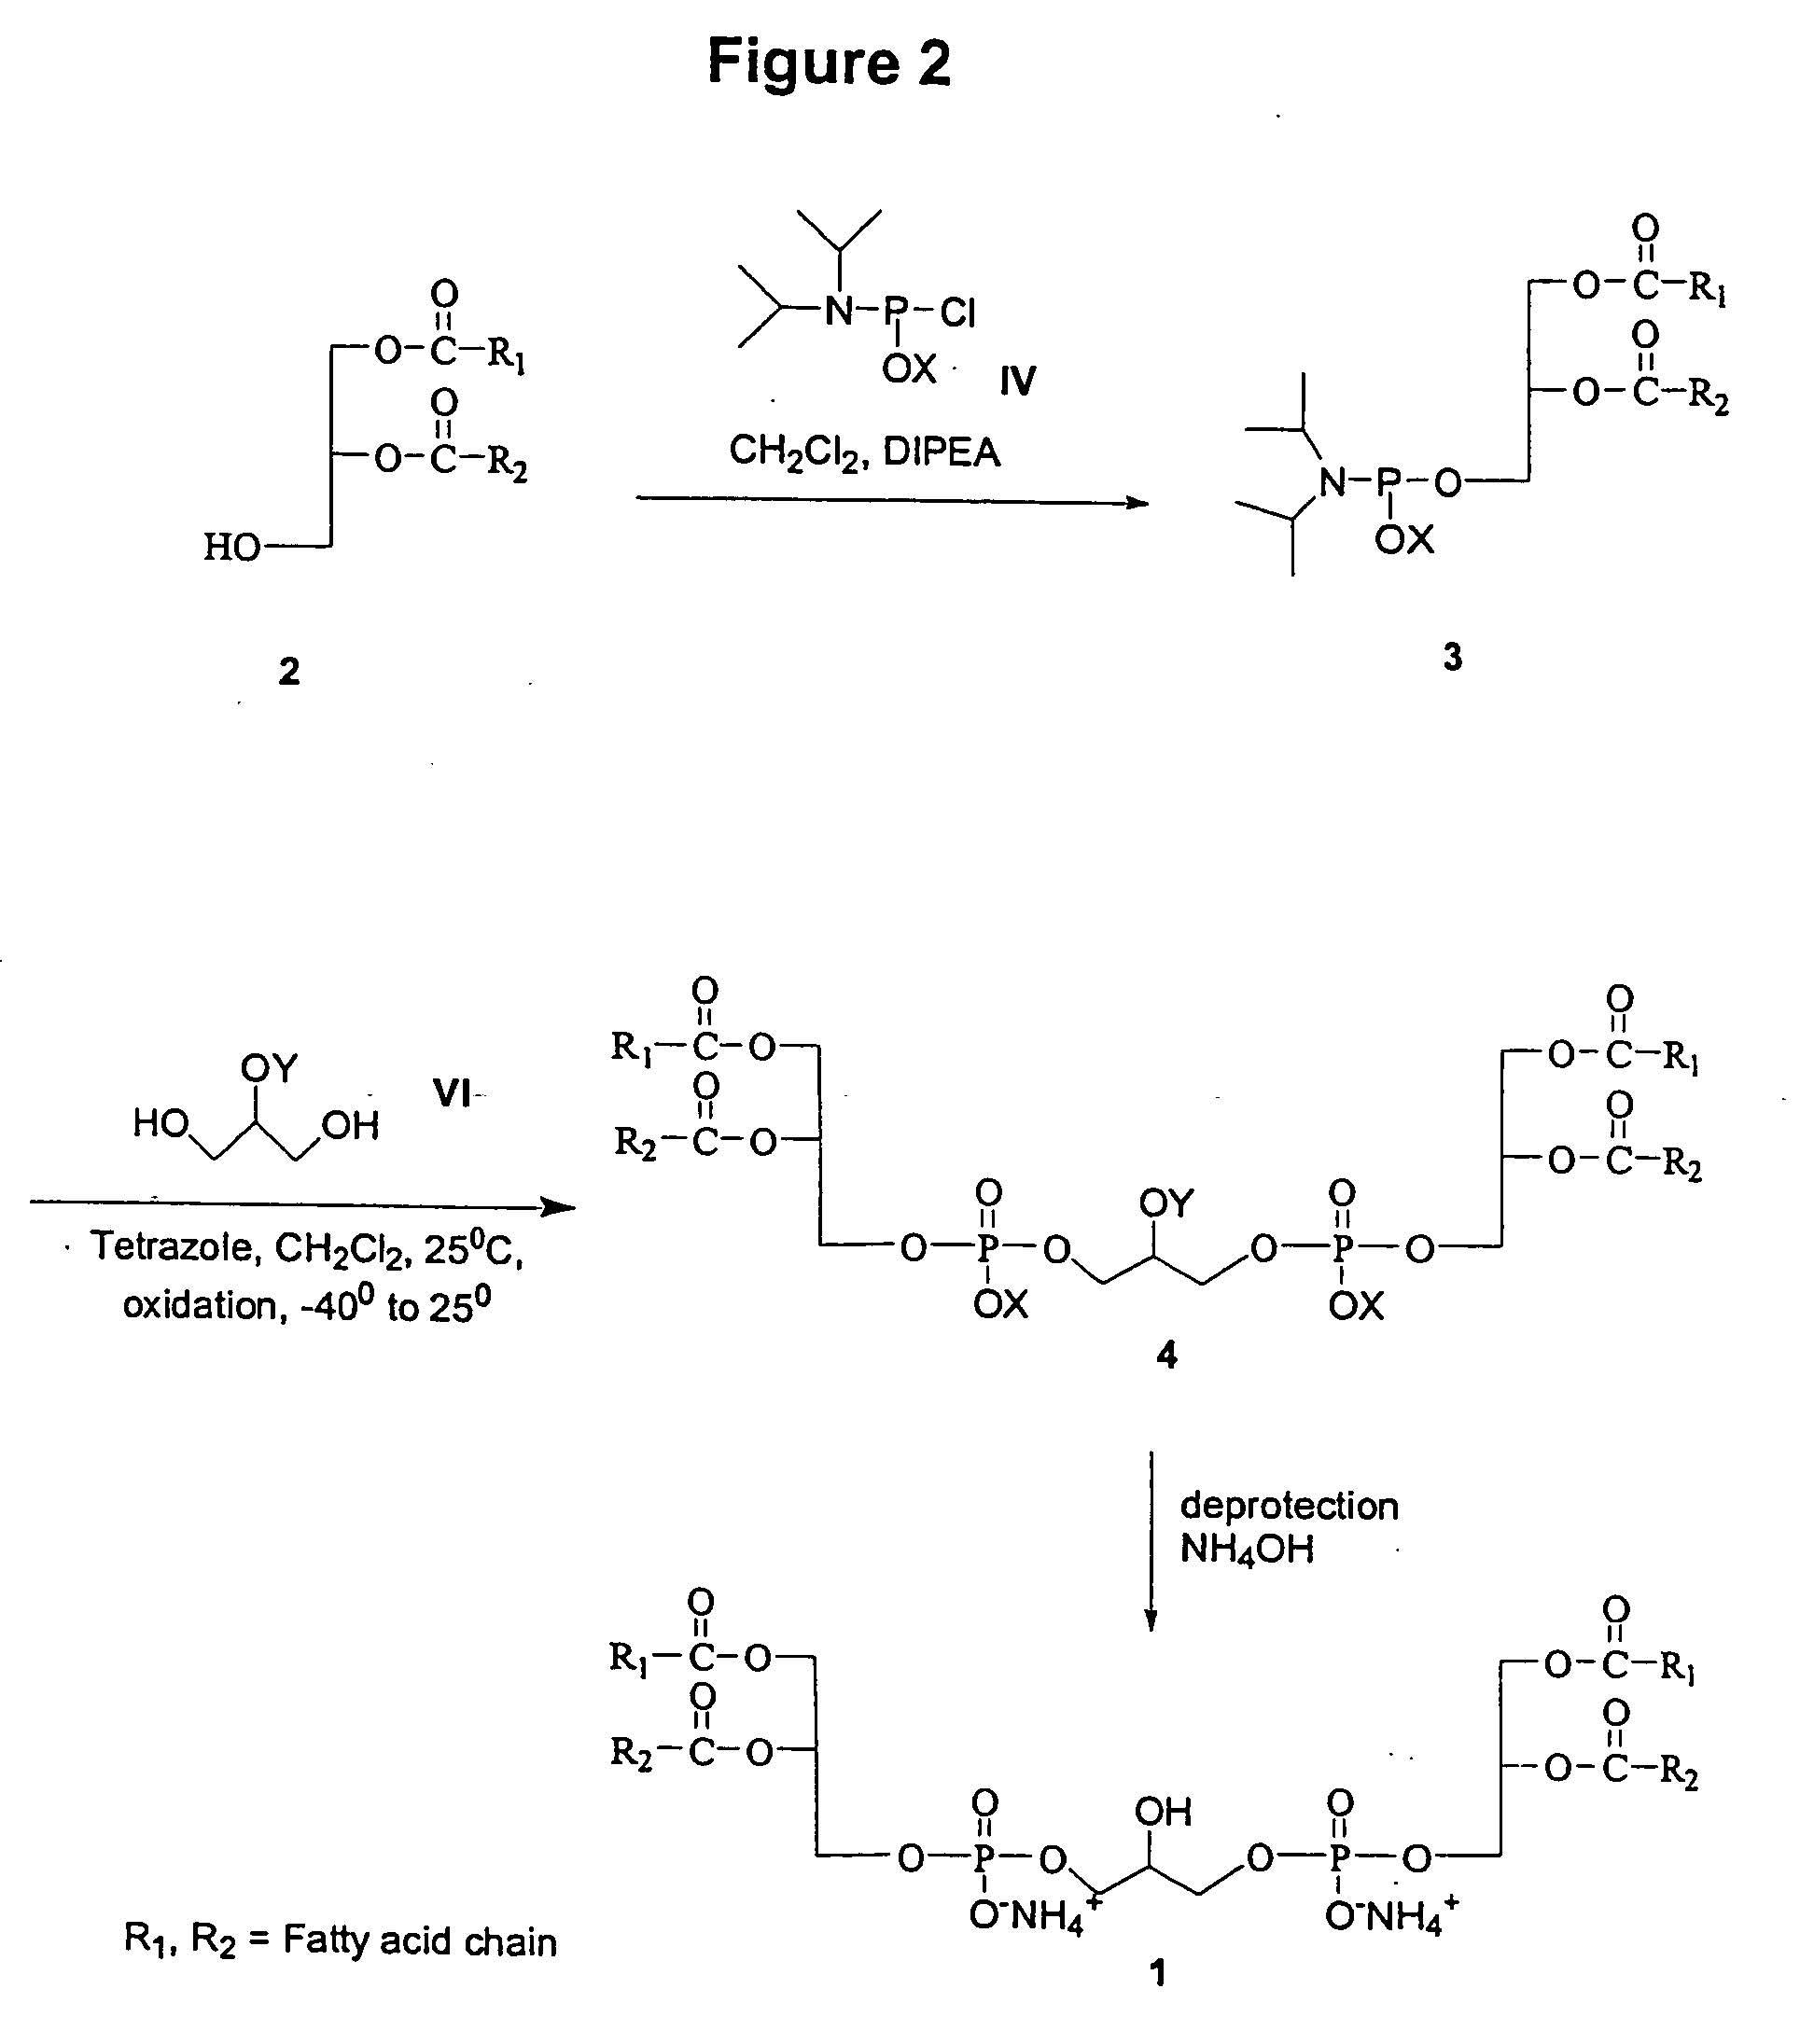 Cardiolipin molecules and methods of synthesis